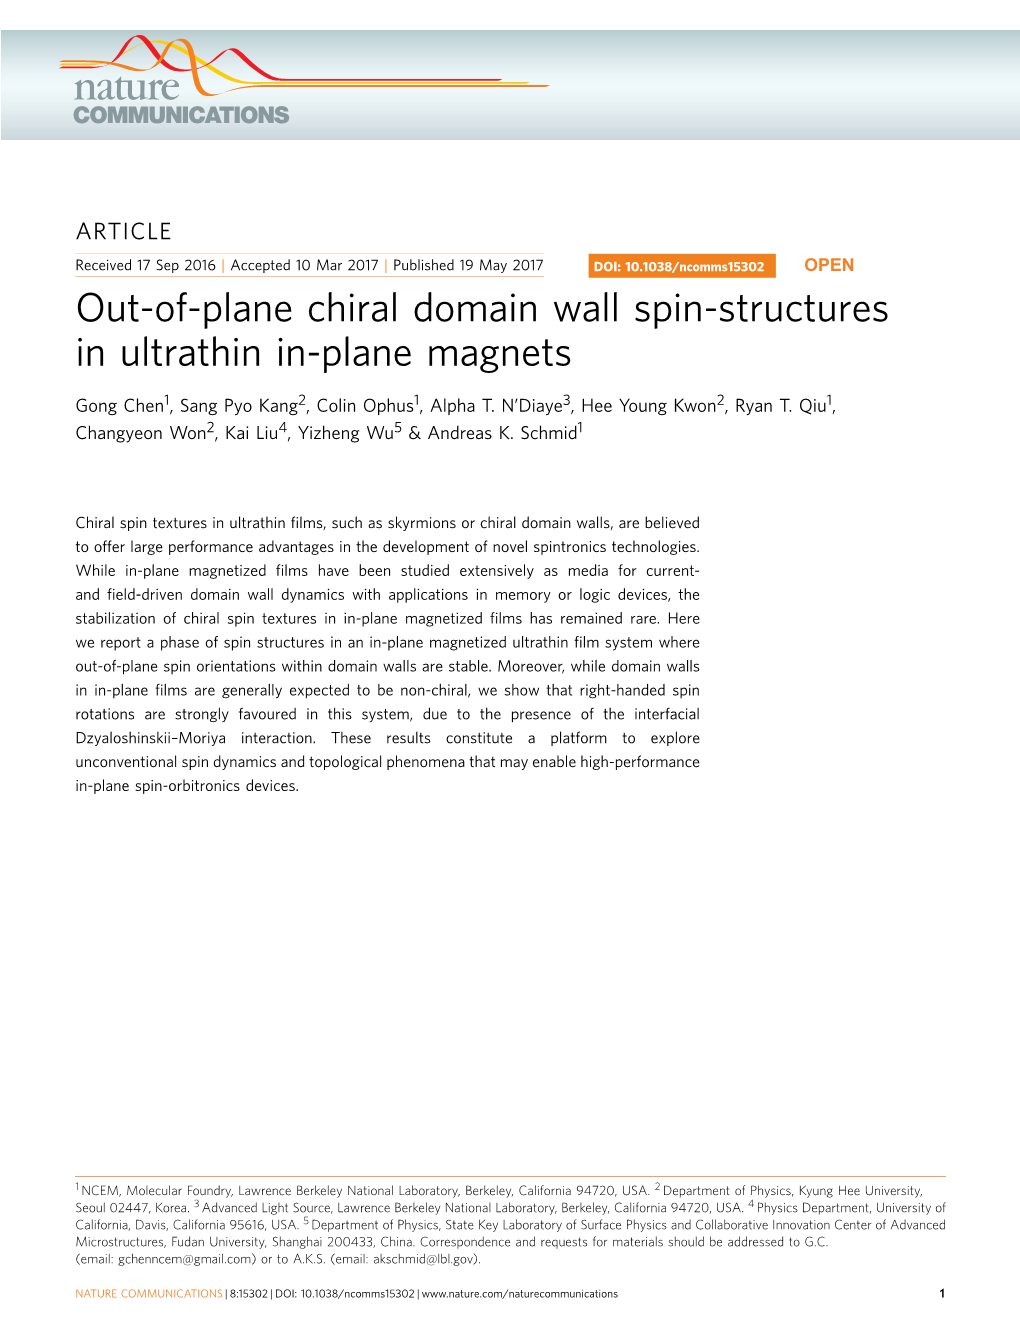 Out-Of-Plane Chiral Domain Wall Spin-Structures in Ultrathin In-Plane Magnets